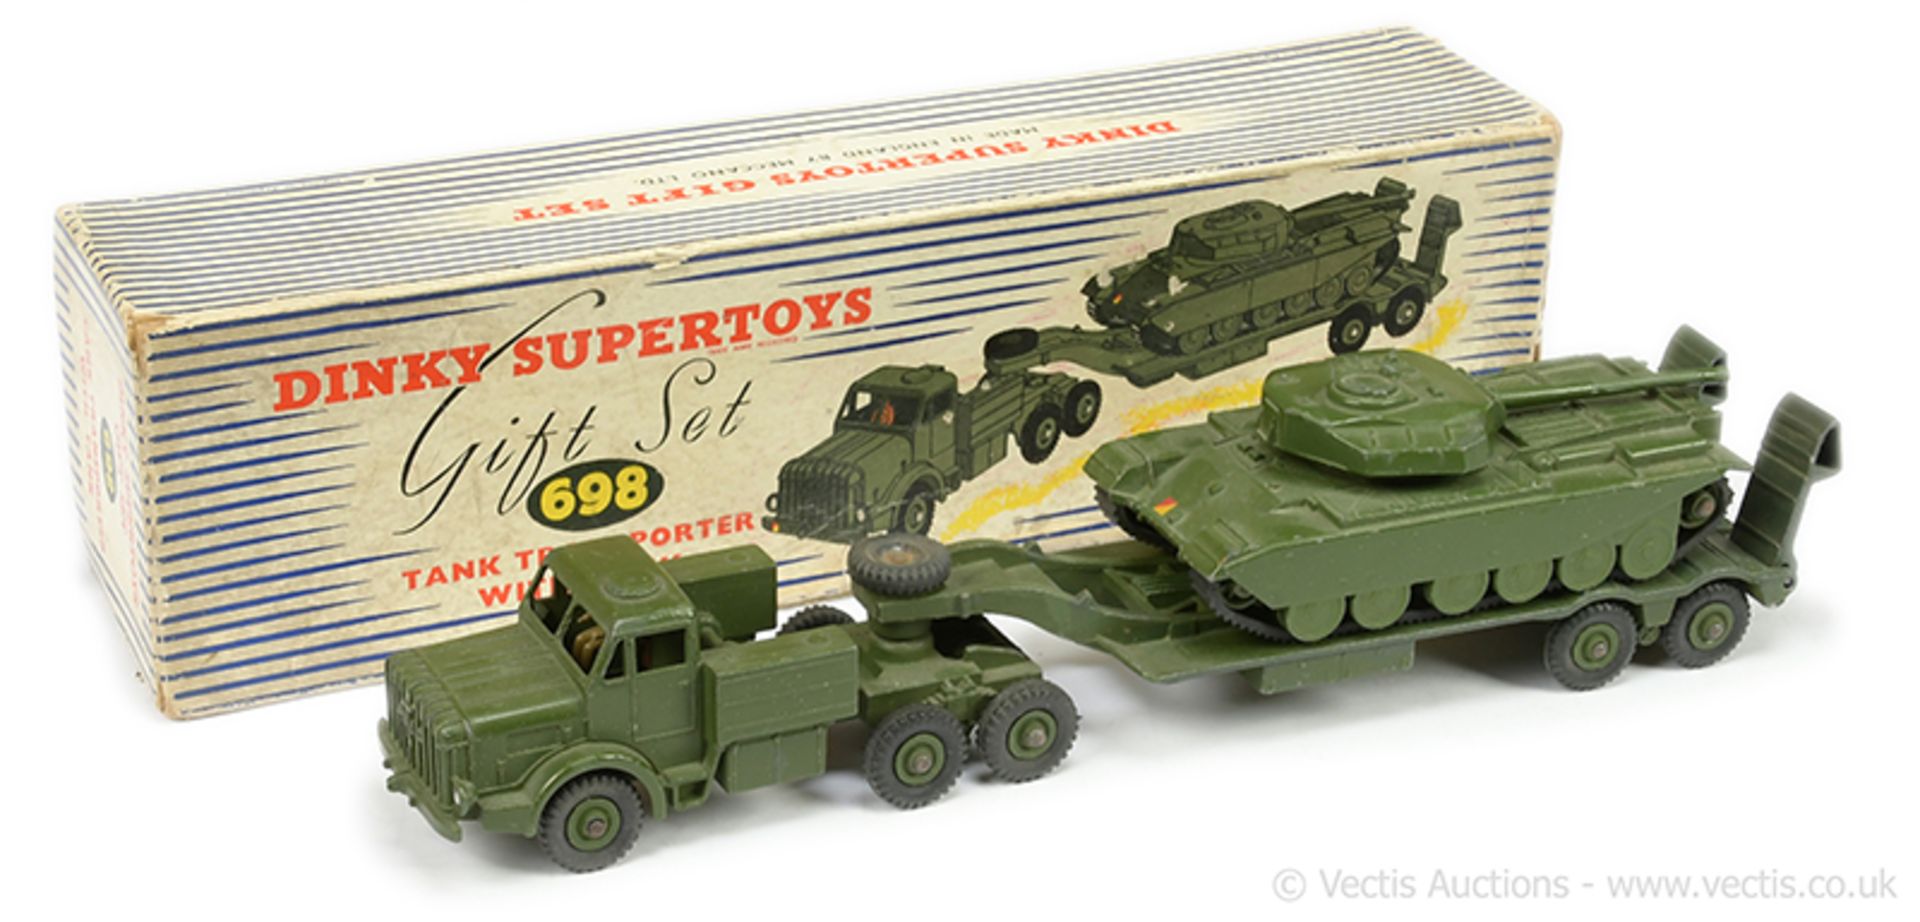 Dinky 698 Military Gift Set Mighty Antar Low